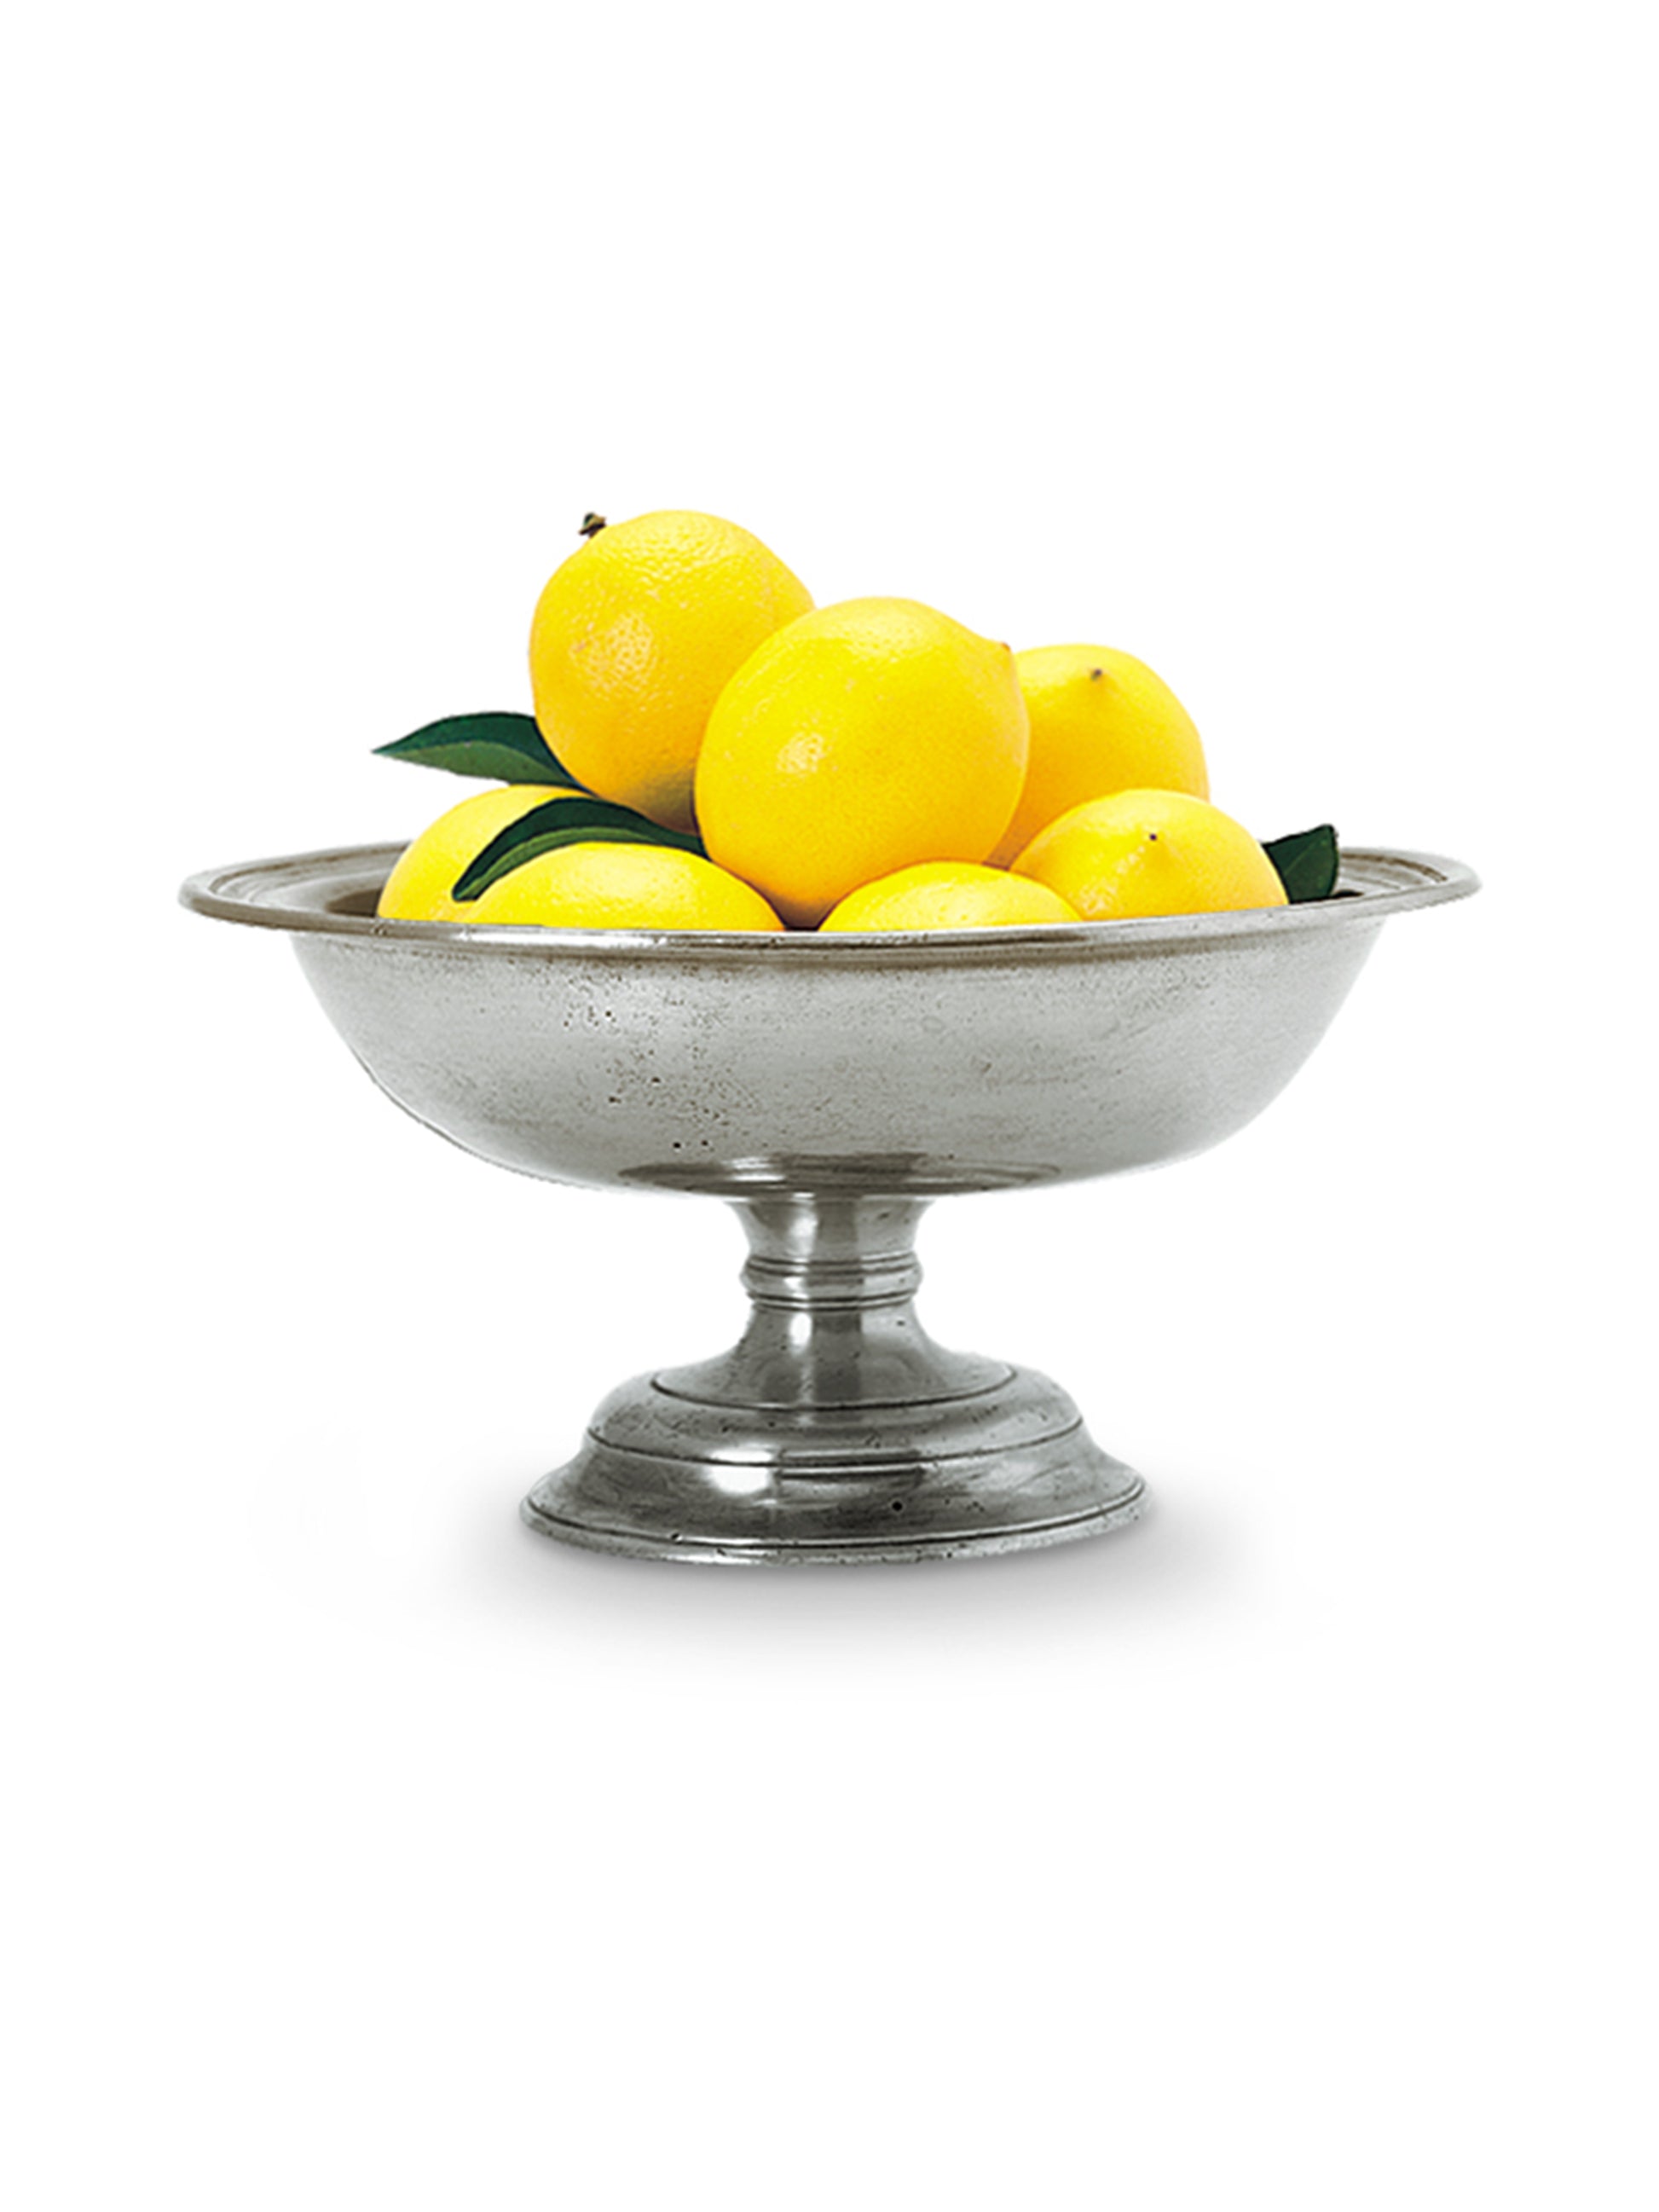 MATCH Pewter Fruit Compote Weston Table